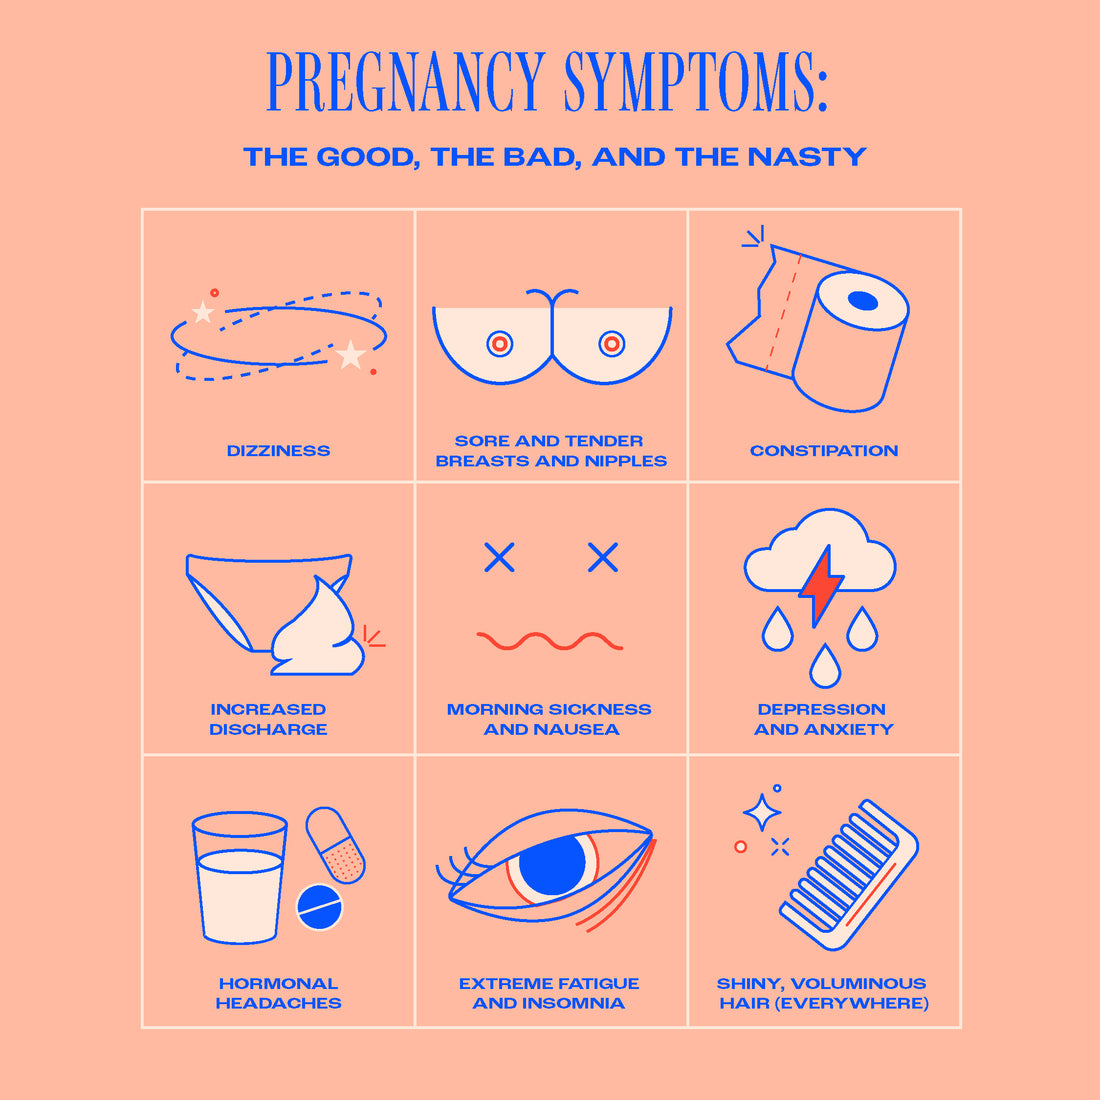 Pregnancy Symptoms: The Good, The Bad, and The Nasty